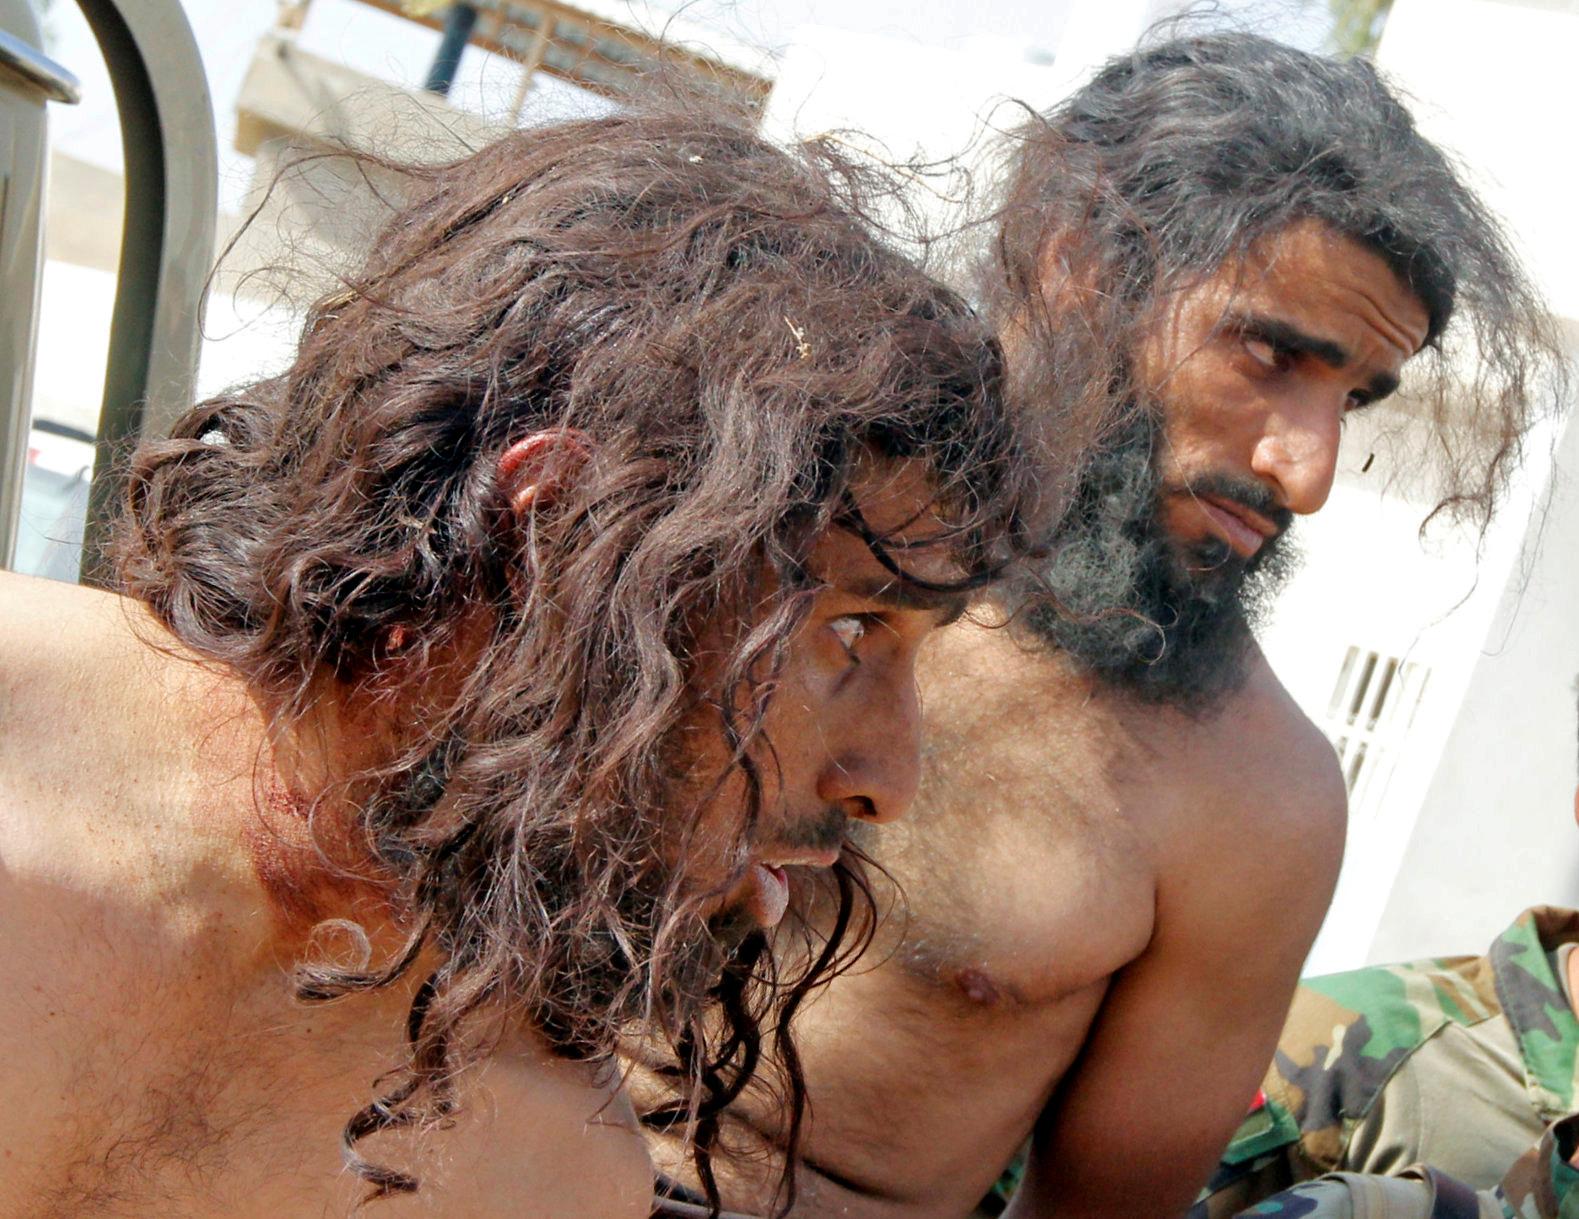 Captives suspected of being Islamic State militants are seen southwest of Kirkuk, Iraq.